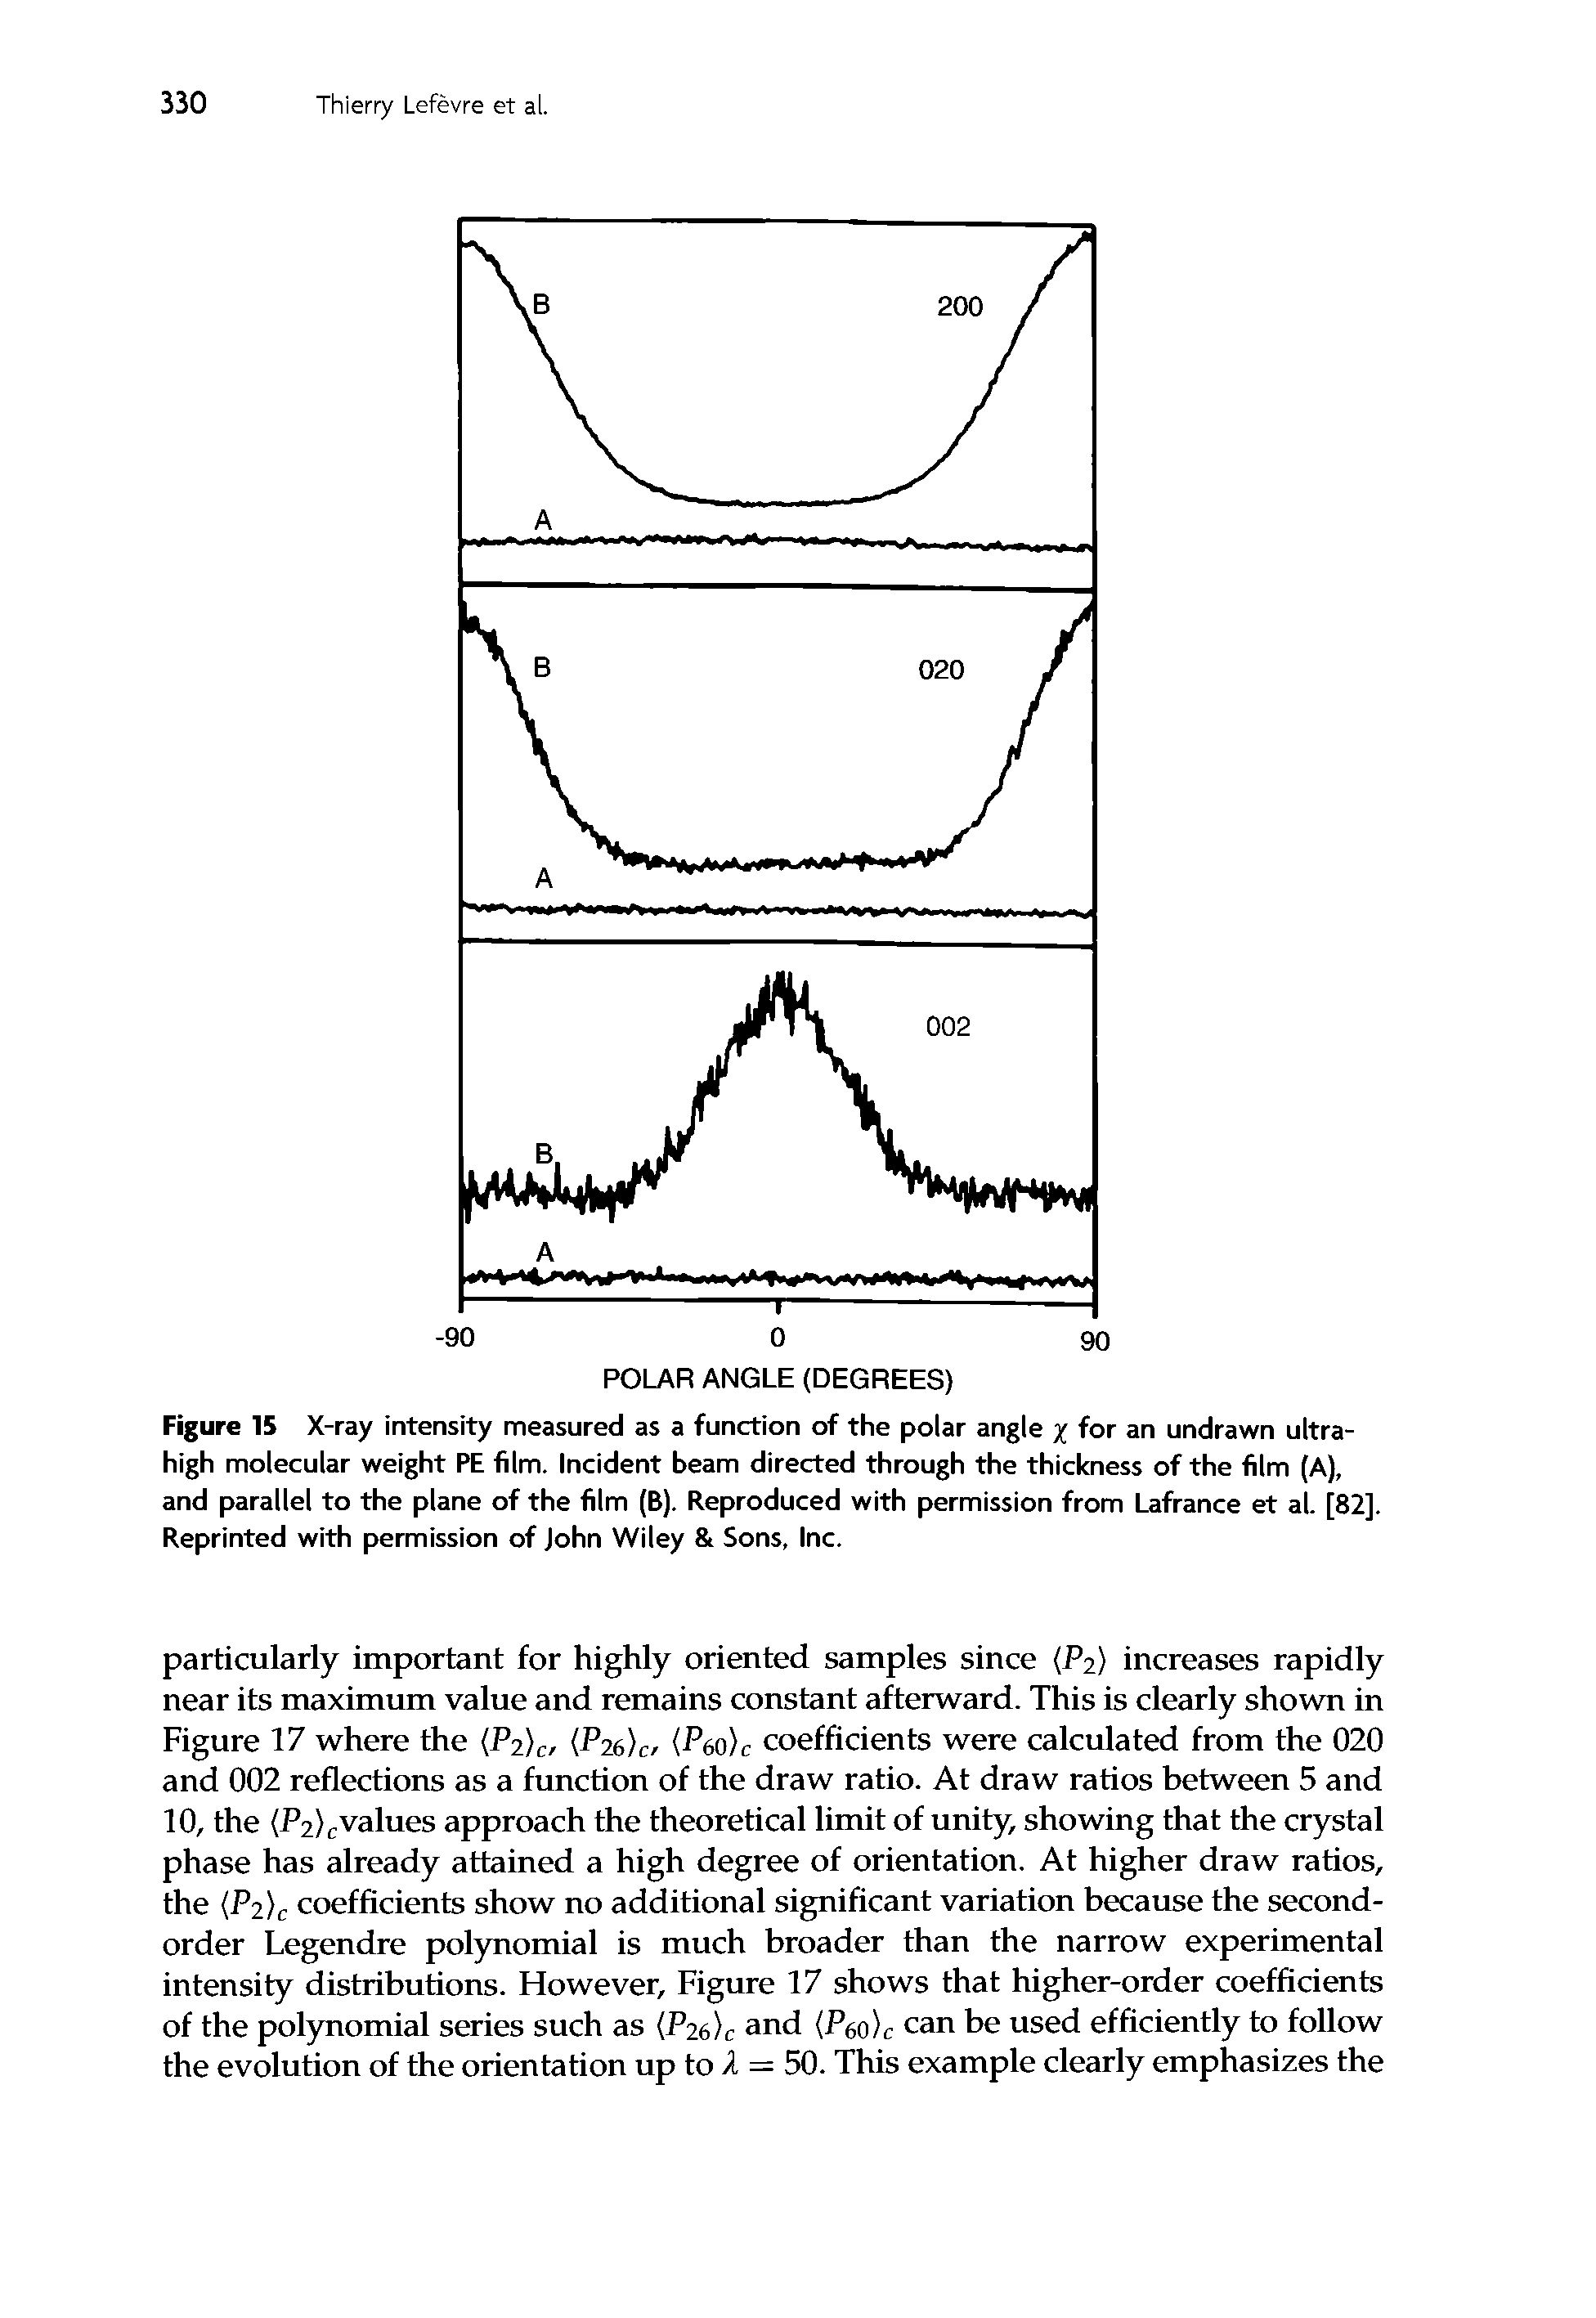 Figure 15 X-ray intensity measured as a function of the polar angle y for an undrawn ultra-high molecular weight PE film. Incident beam directed through the thickness of the film (A), and parallel to the plane of the film (B). Reproduced with permission from Lafrance et al. [82]. Reprinted with permission of John Wiley 8t Sons, Inc.